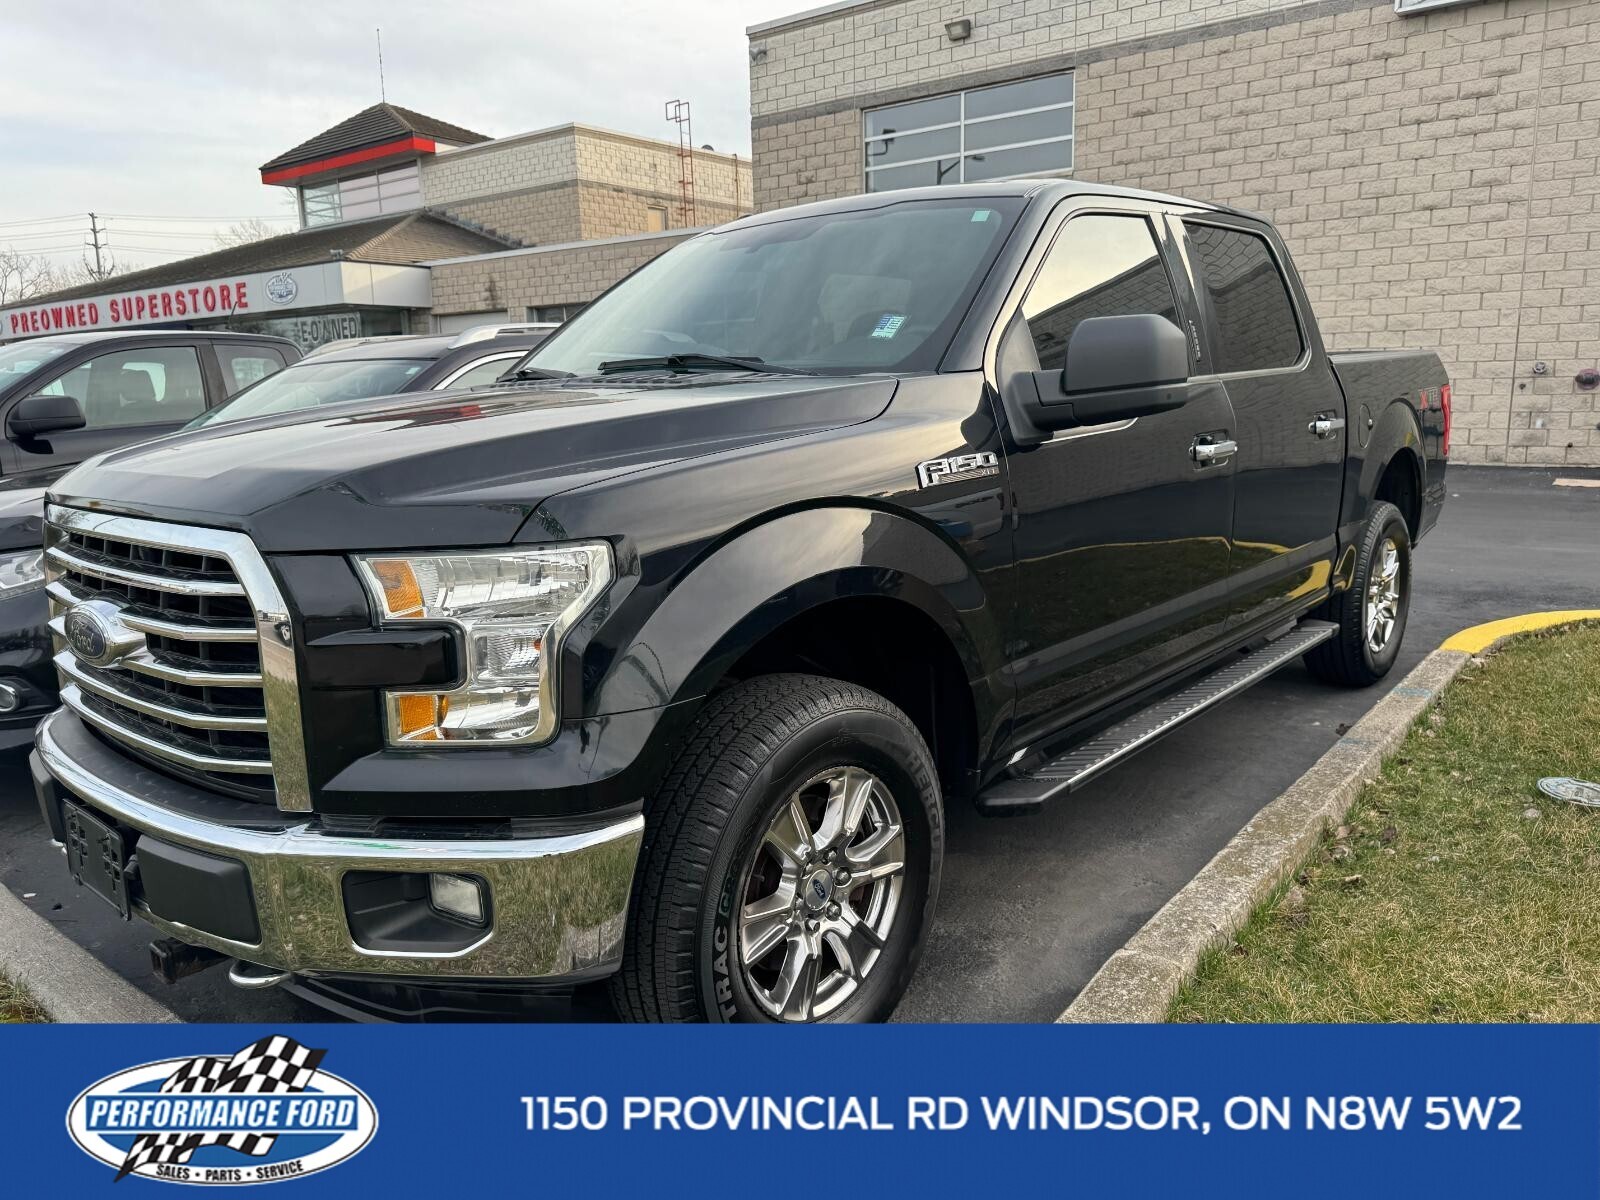 2015 Ford F-150 SOLD AS IS